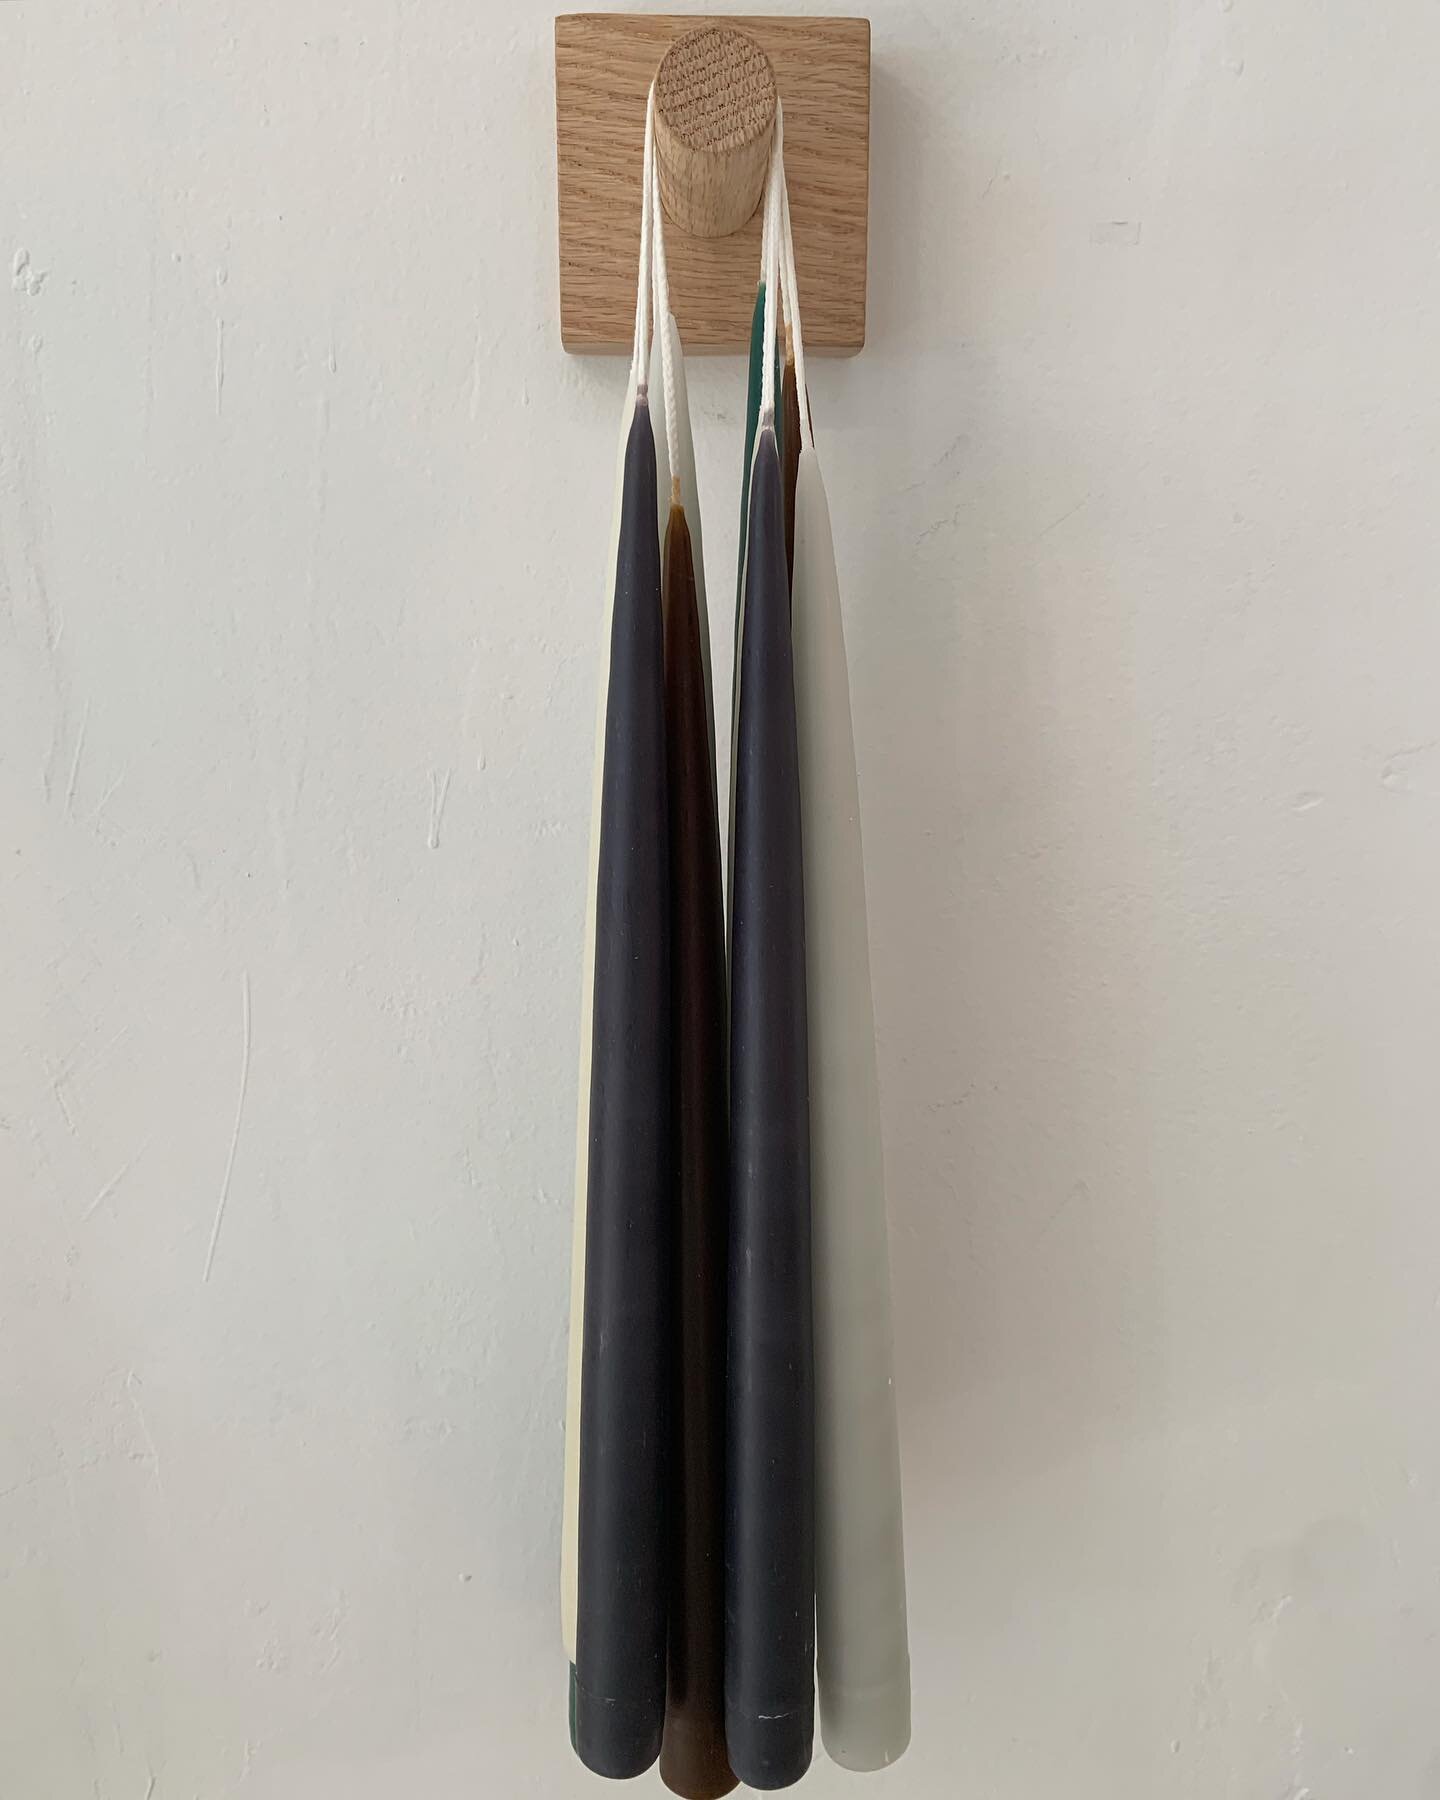 Tapers for these darker days are necessary. These are handmade in Maine. I once challenged myself during a dark winter to try and embrace it and use only the short day light and candle light at night to exist and adjust to our natural circadian rhyth